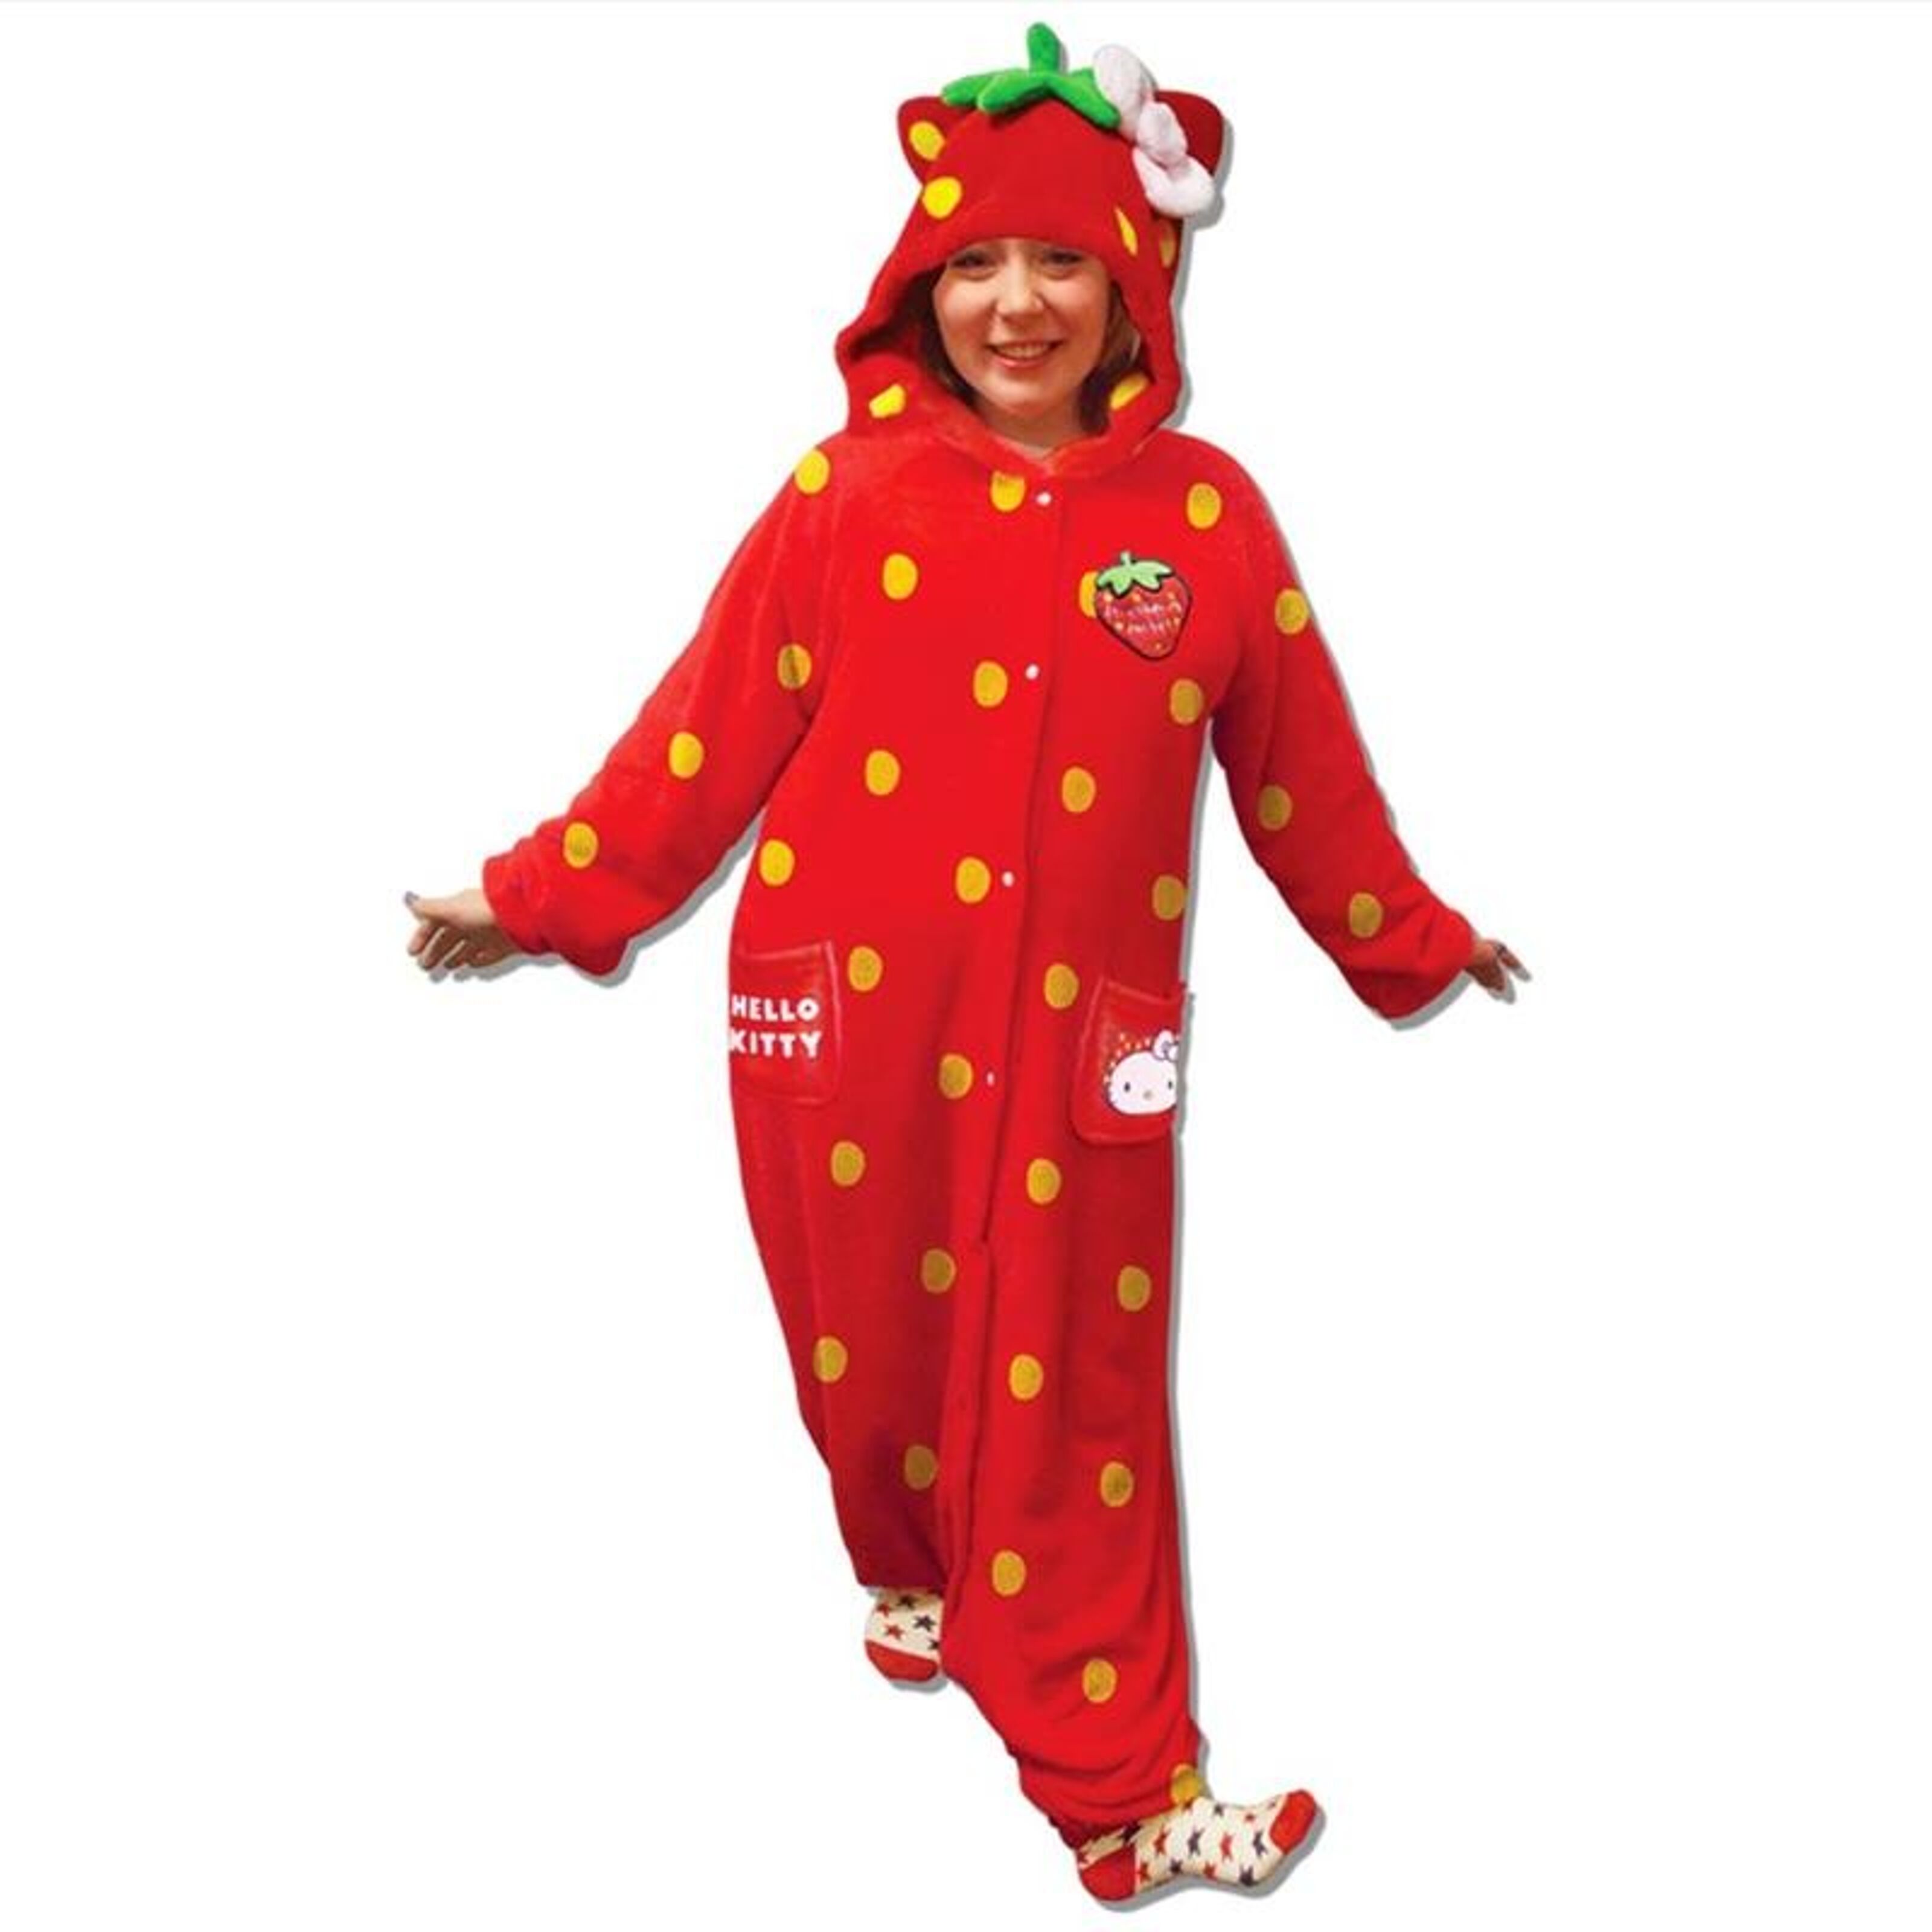 Hello kitty onesie for adults Captain hook adult costume